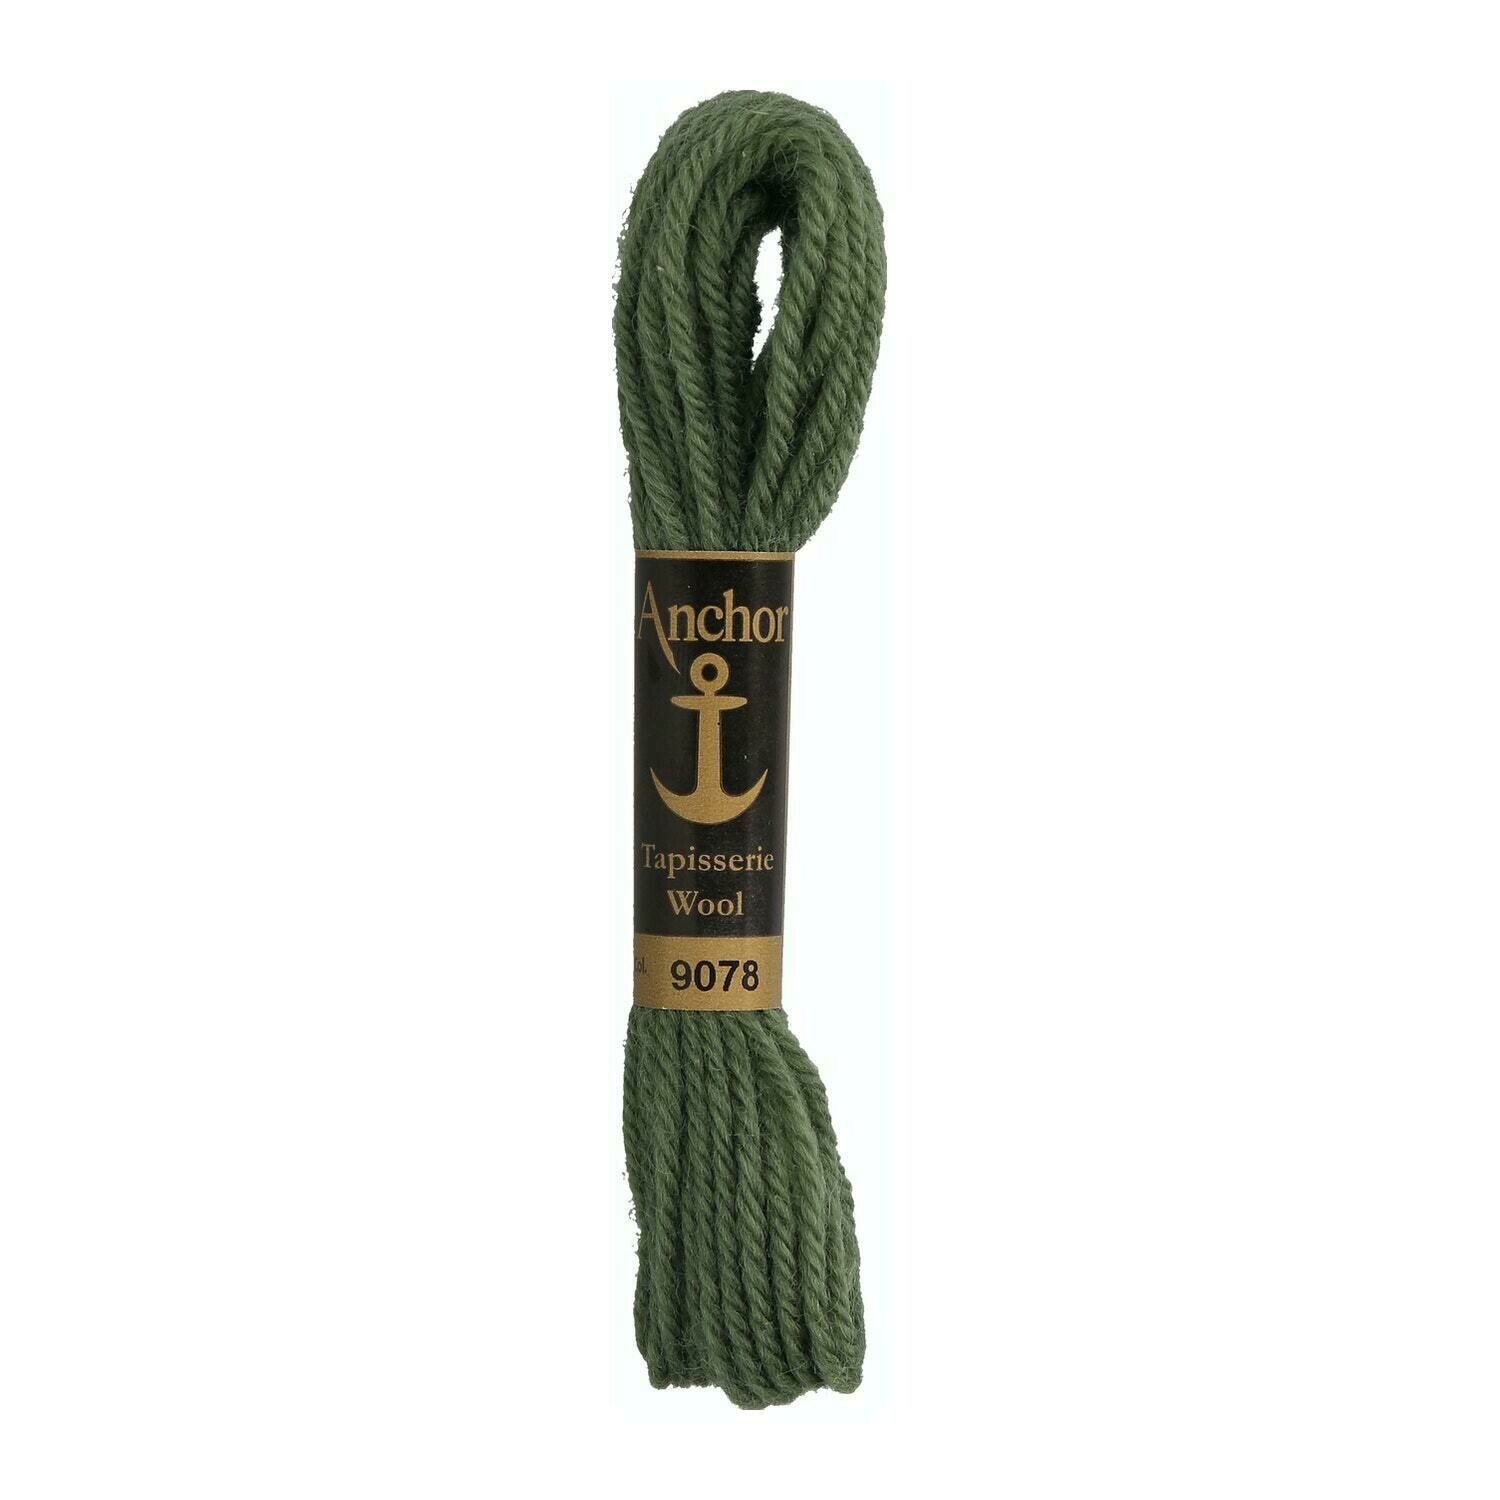 Anchor Tapisserie Wool #09078